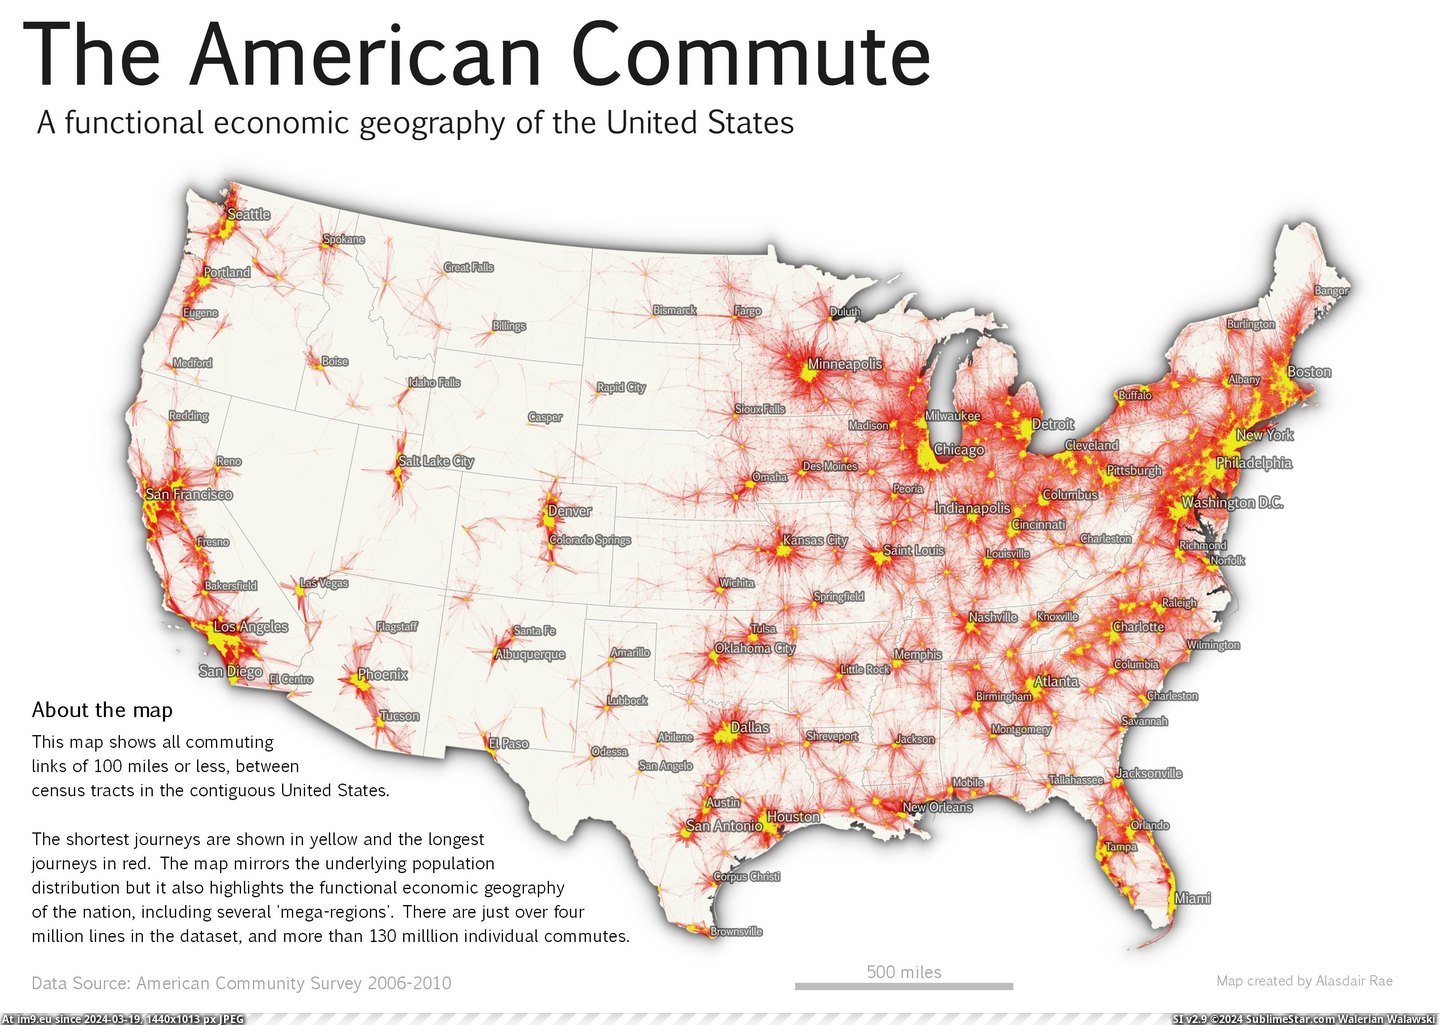 #Map #American #Usa #Commute #Links #Miles #Rae #Contiguous [Mapporn] The American Commute: map of all commuting links of 100 miles or less in the contiguous USA. (by Alasdair Rae)[3507x24 Pic. (Изображение из альбом My r/MAPS favs))